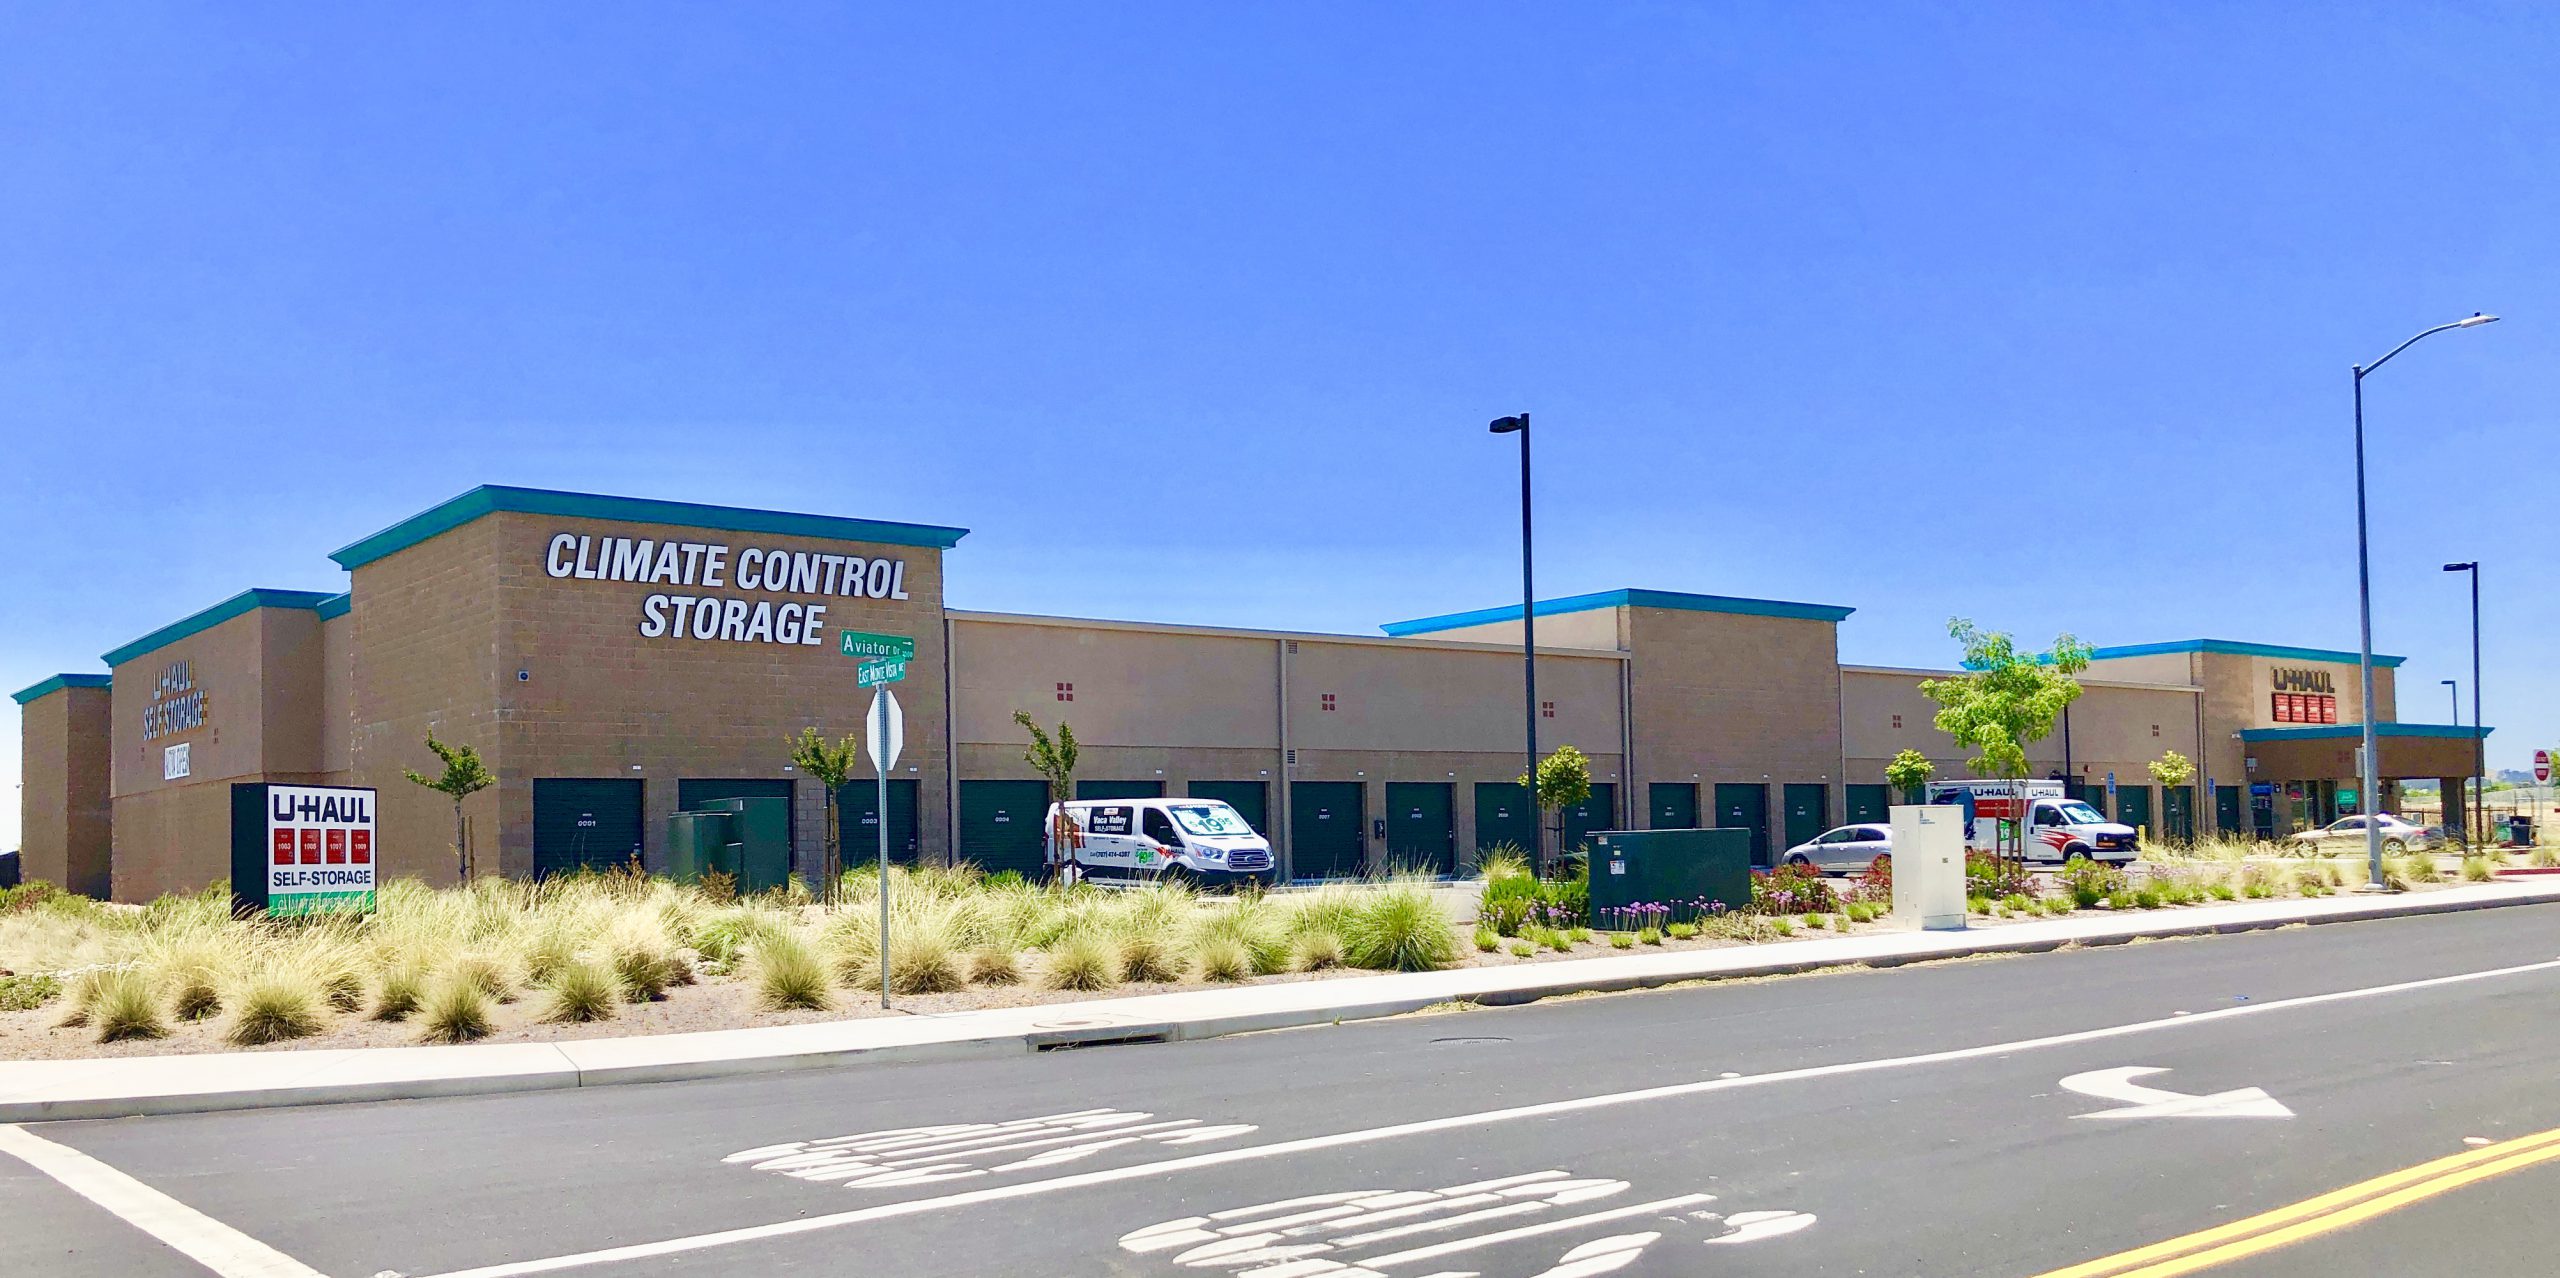 Vacaville Fire Victims: U-Haul Offers 30 Days Free Self-Storage